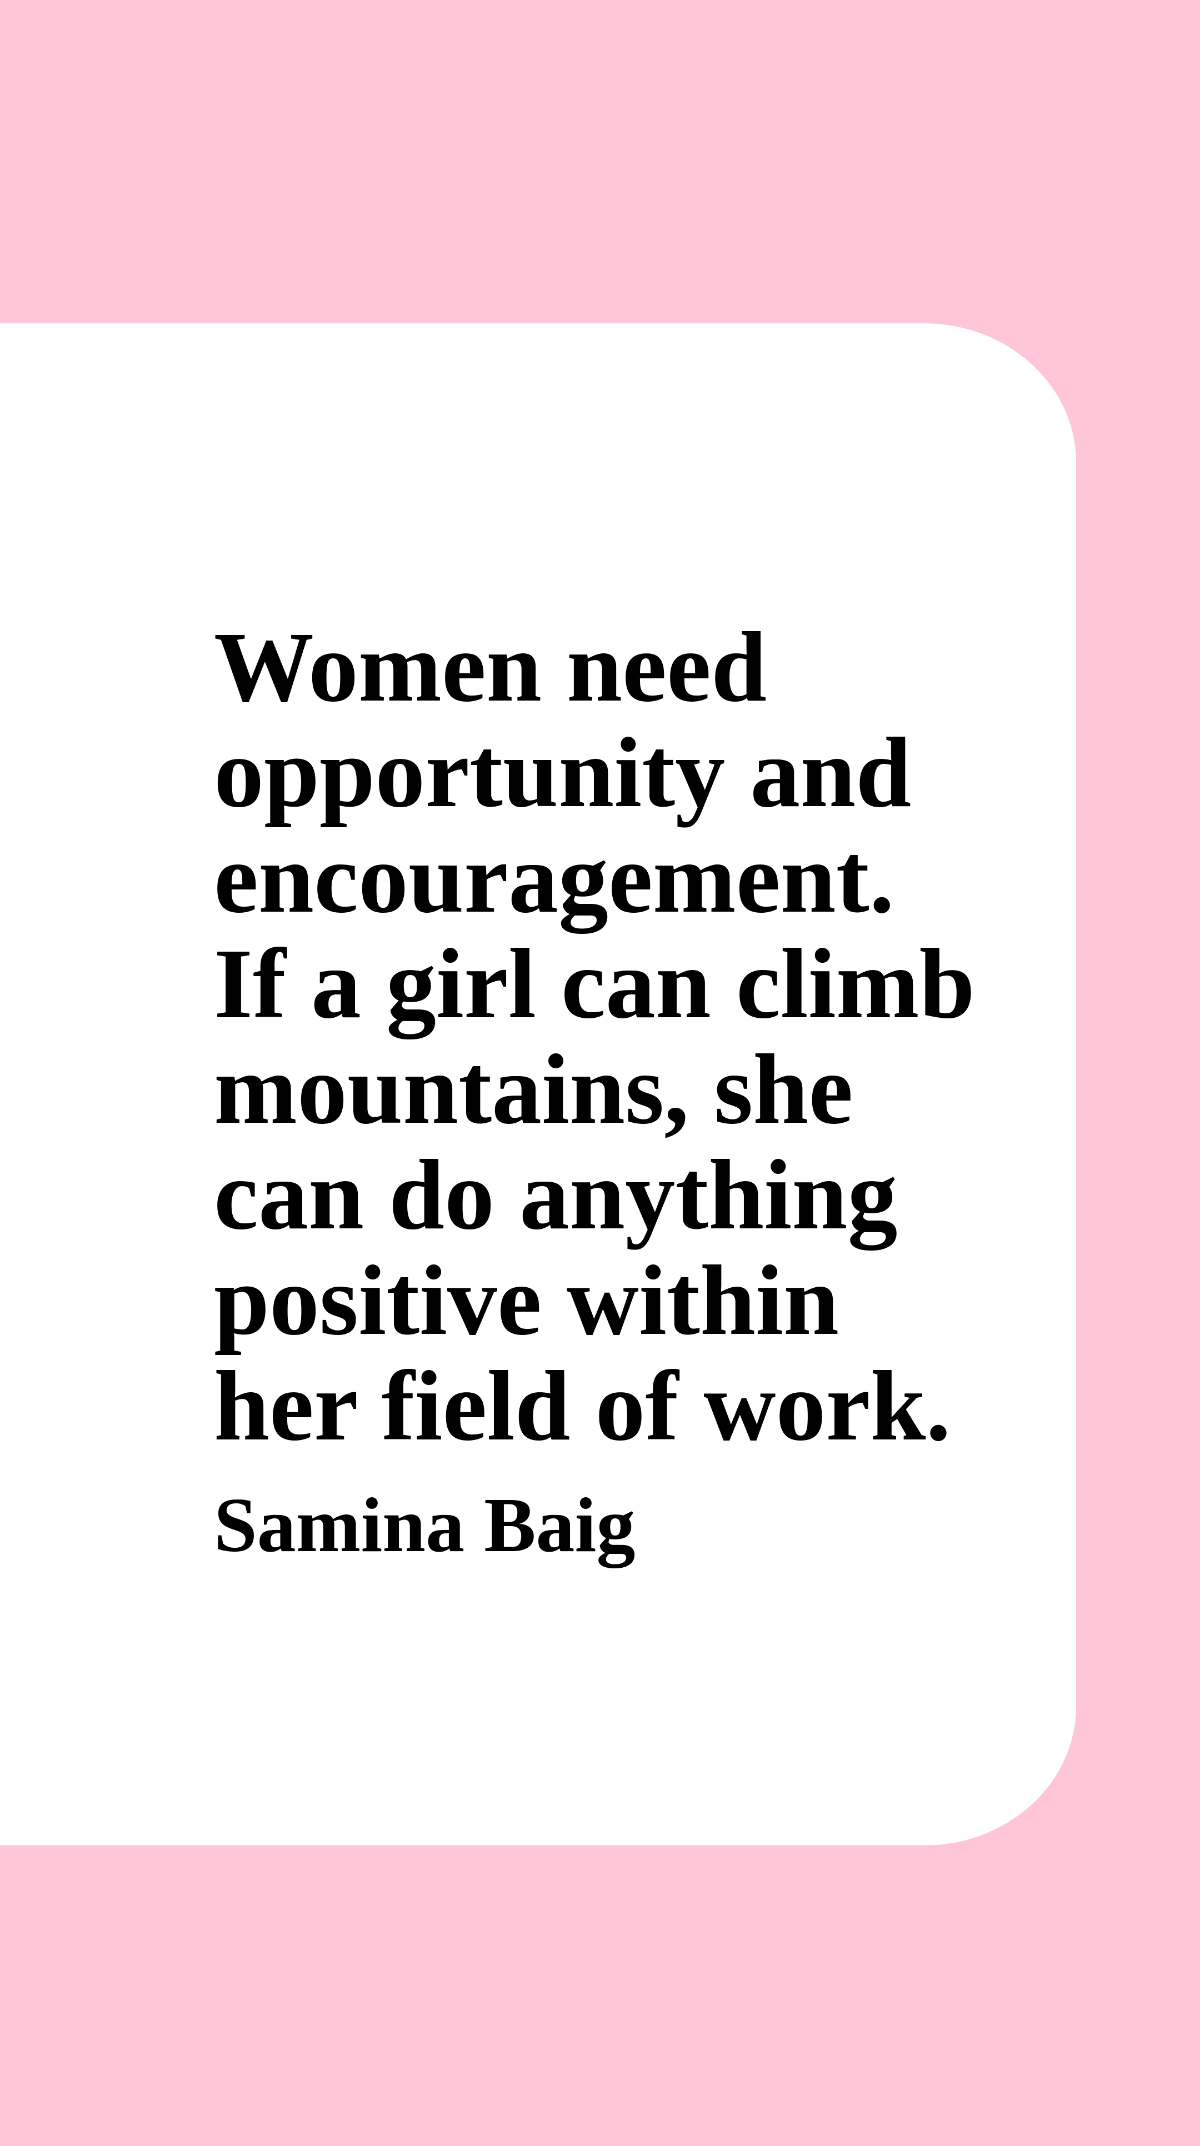 Samina Baig - Women need opportunity and encouragement. If a girl can climb mountains, she can do anything positive within her field of work.